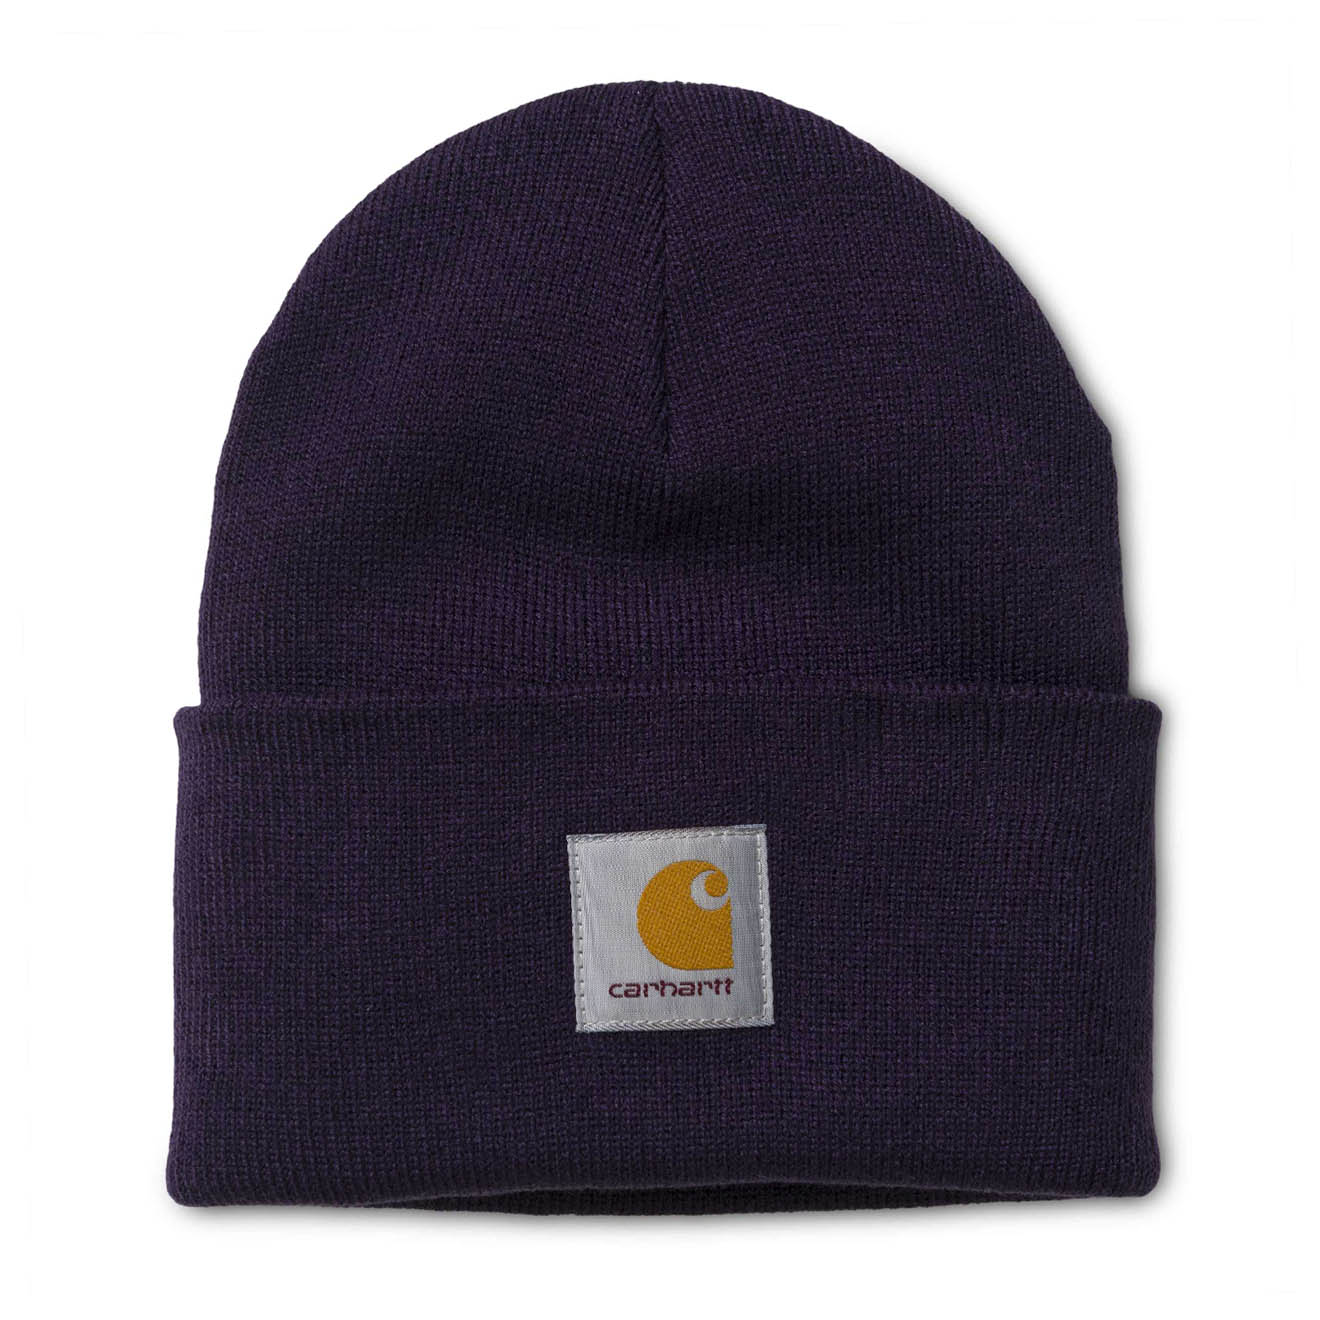 CARHARTT WIP - GORRO COLOR LAKERS freeshipping - FREESTYLE LLORET